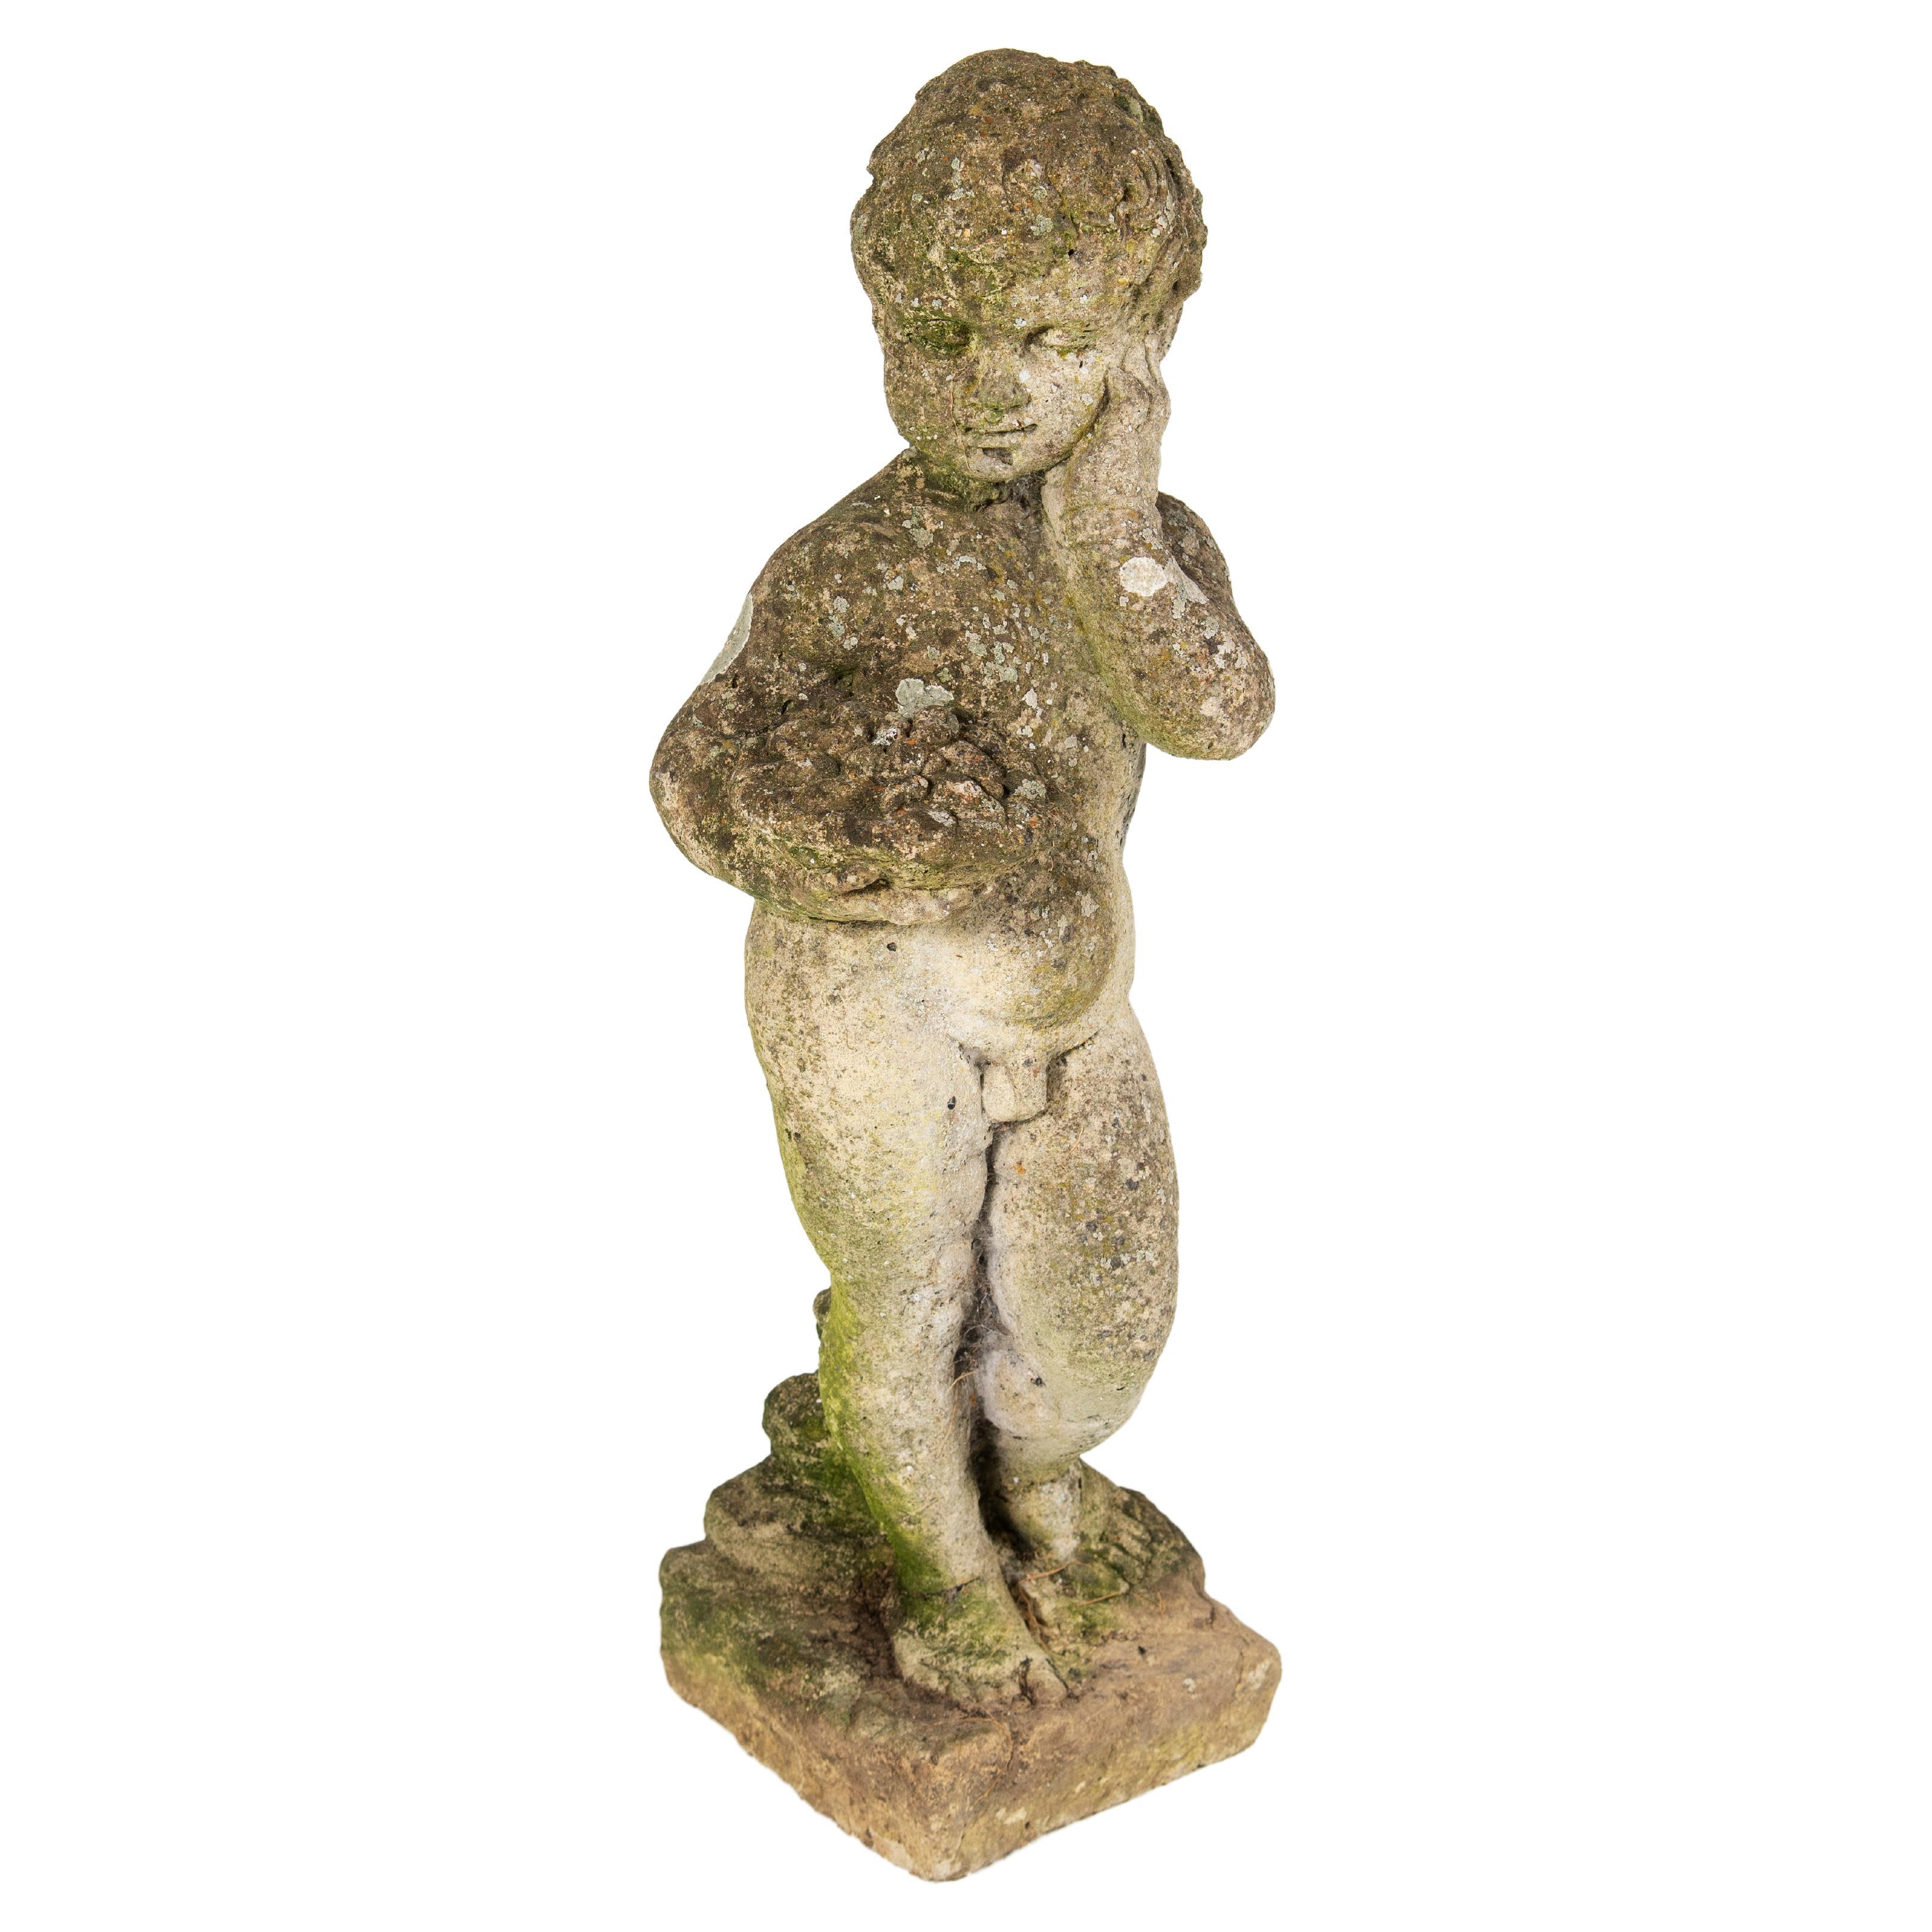 Large Maiden naked lady stone garden ornament statue elegant heavy solid 